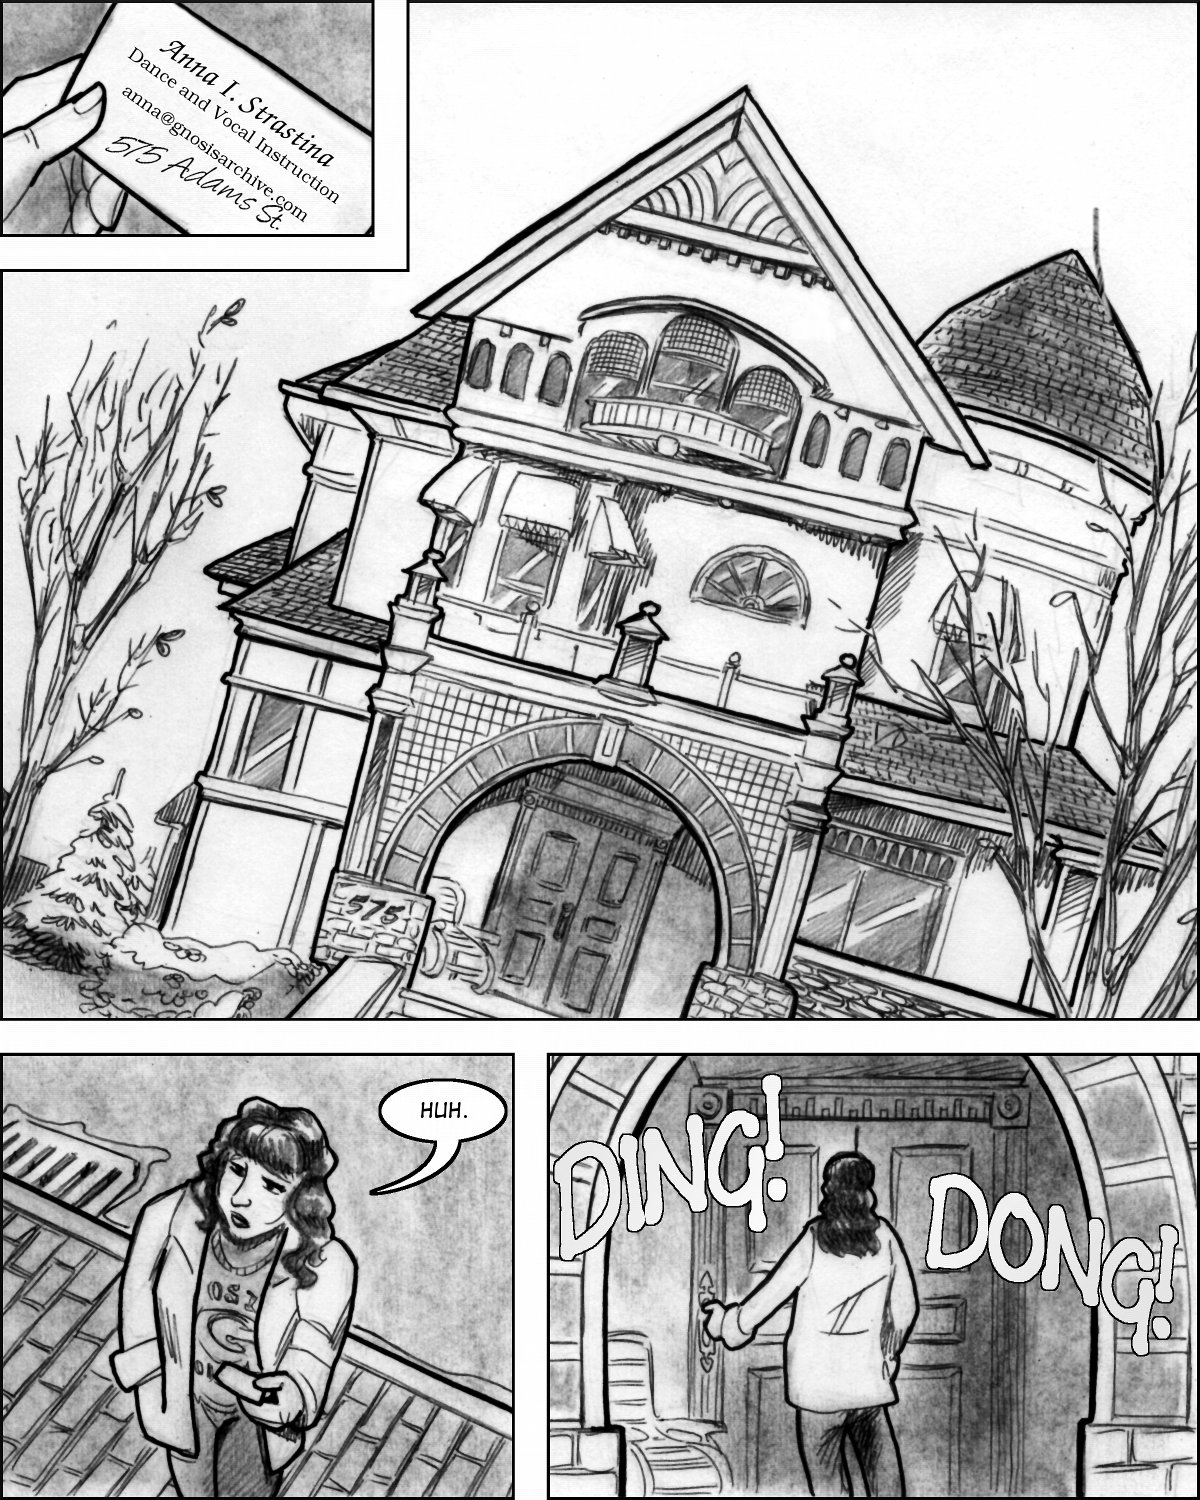 Tanya arrives for a private lesson at an elaborate Victorian house.